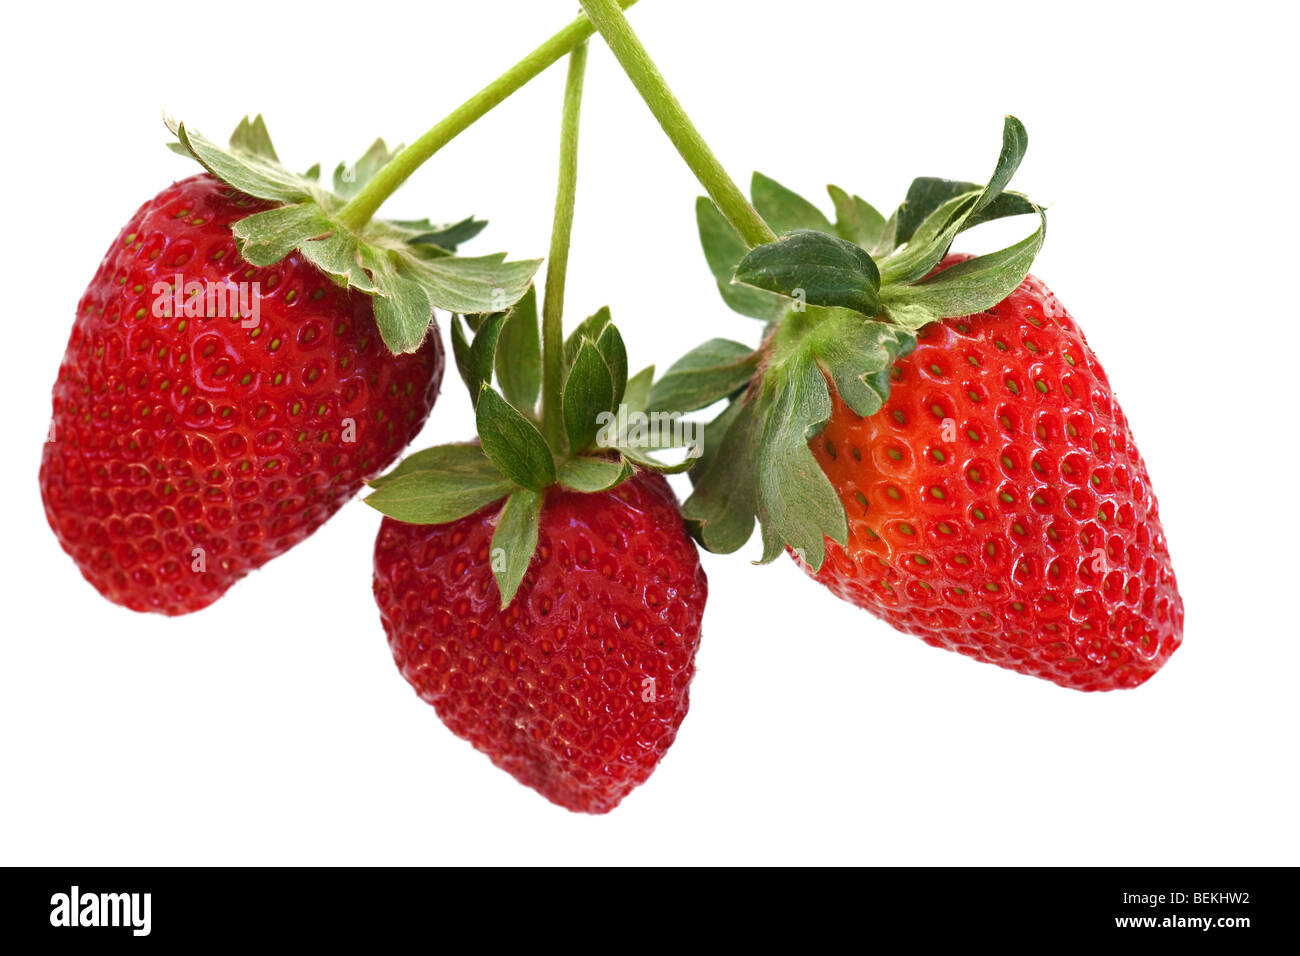 ripe red strawberries with stems and leaves Stock Photo